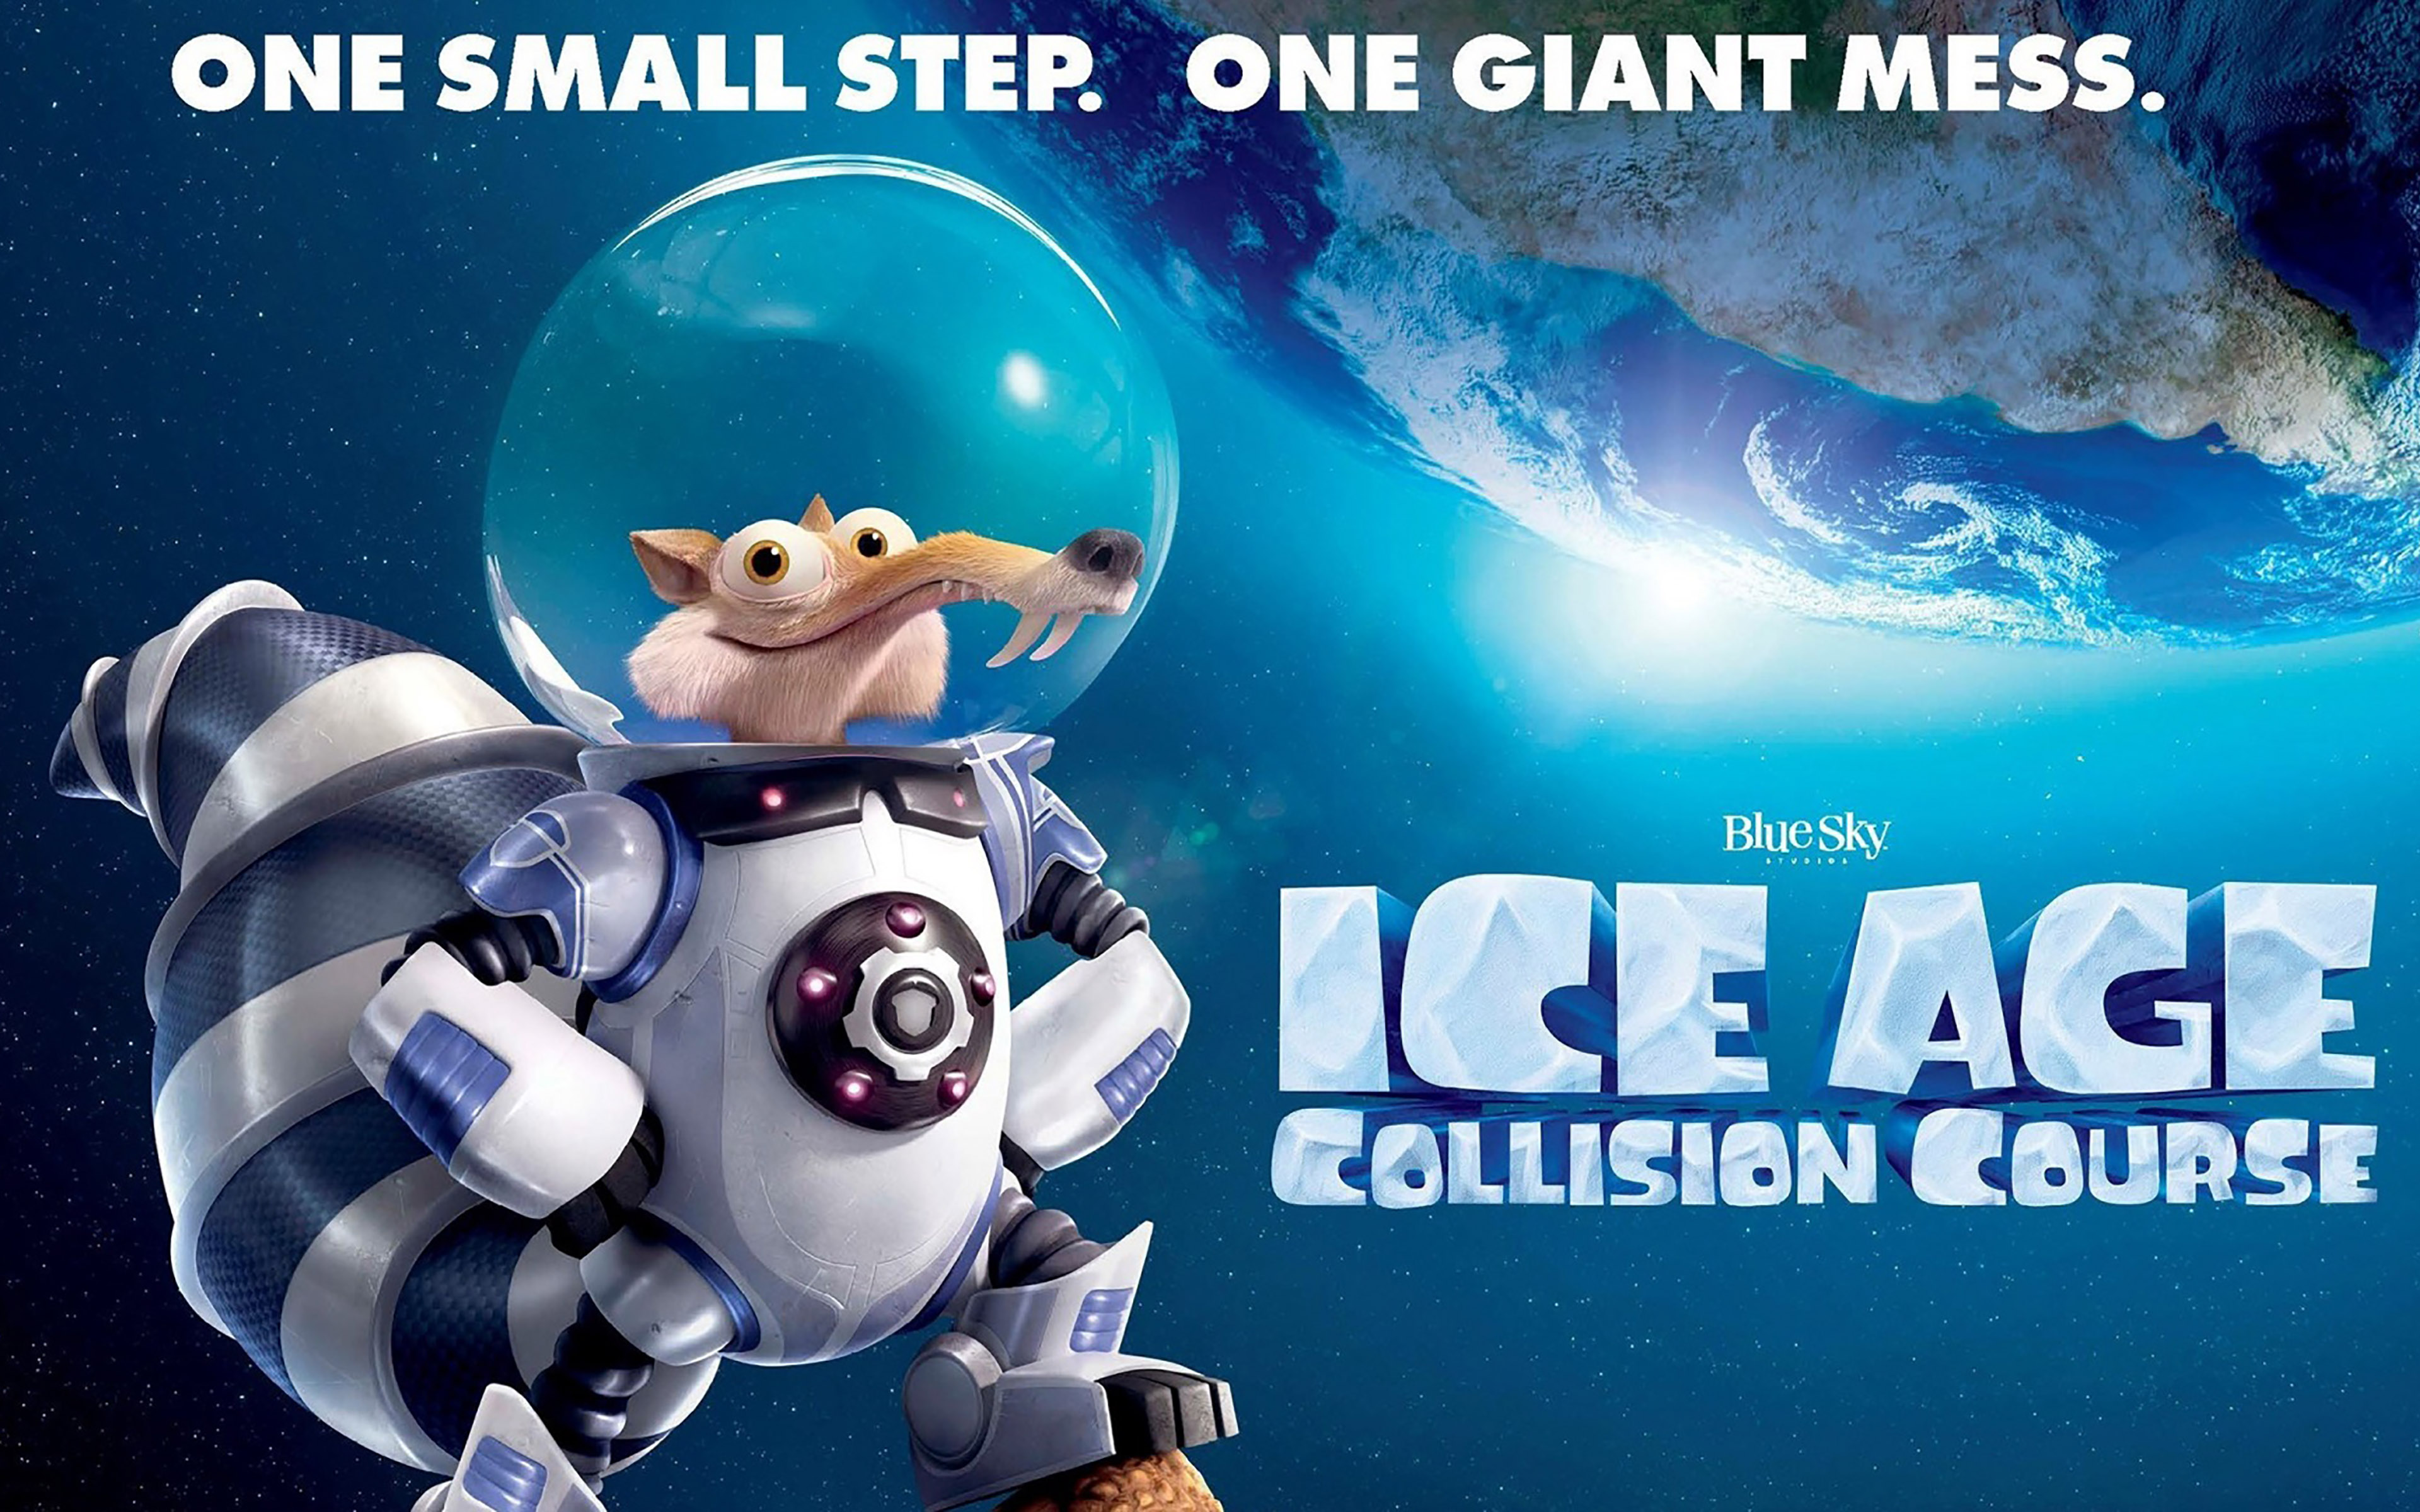 ice-age-collision-course-movie-animated-wallpapersbyte-com-3840x2400.jpg